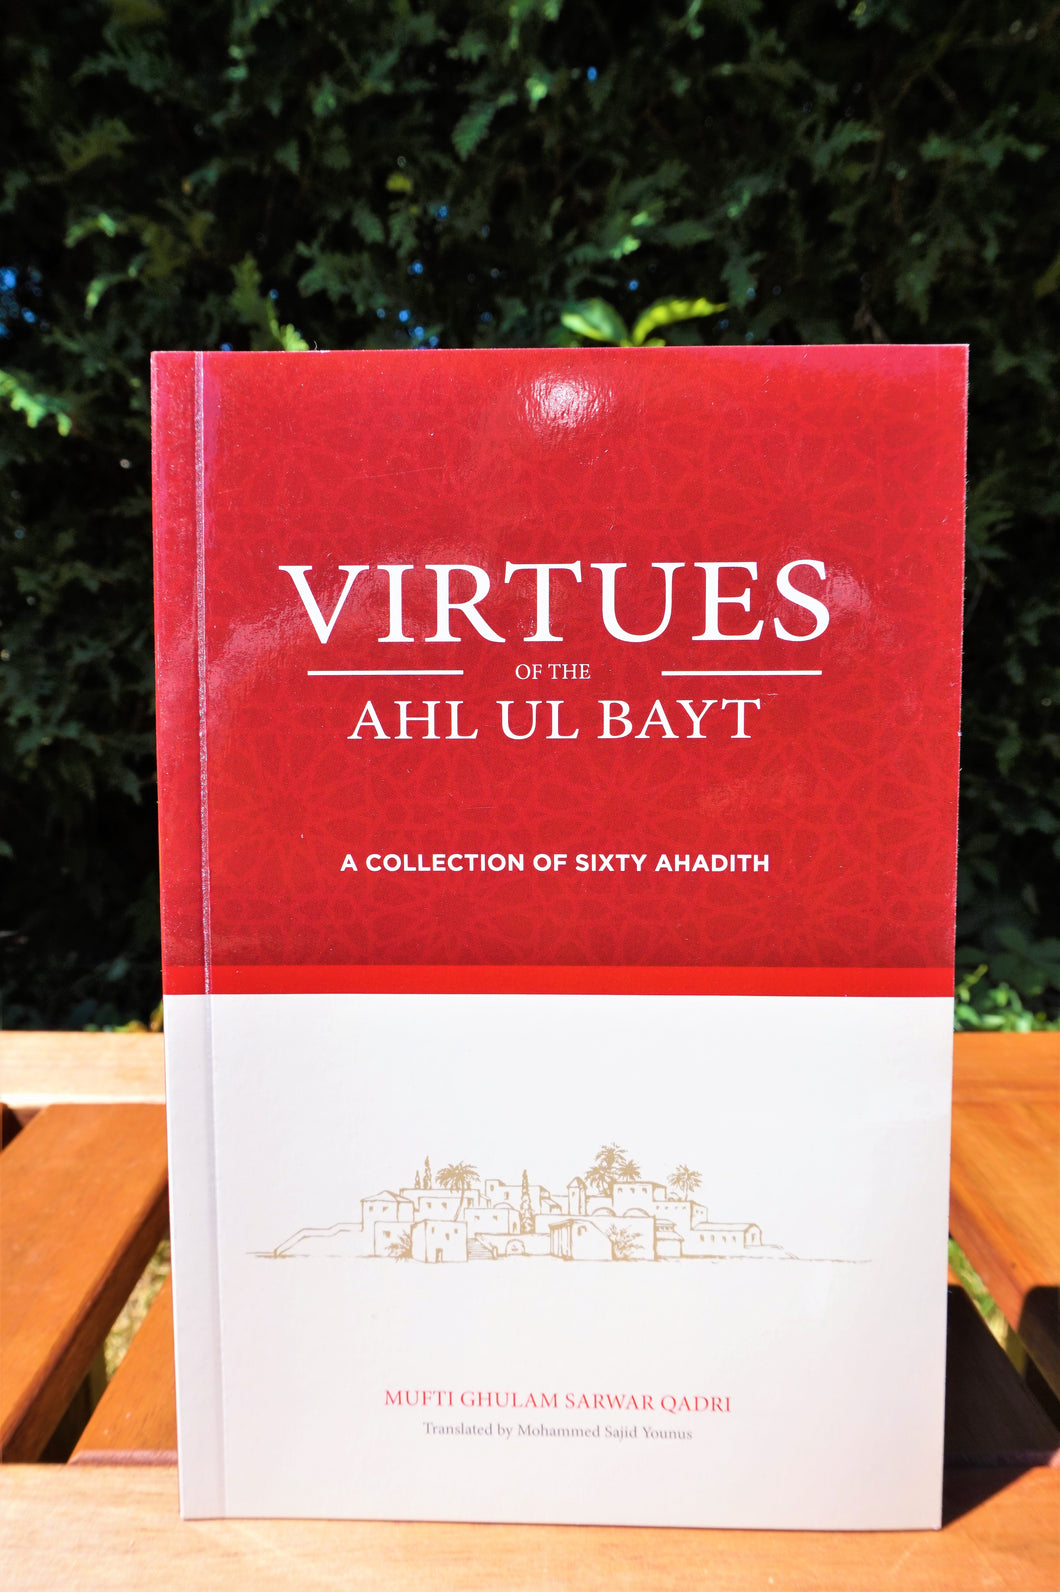 Virtues of the Ahl ul Bayt: A Collection of 60 Ahadith